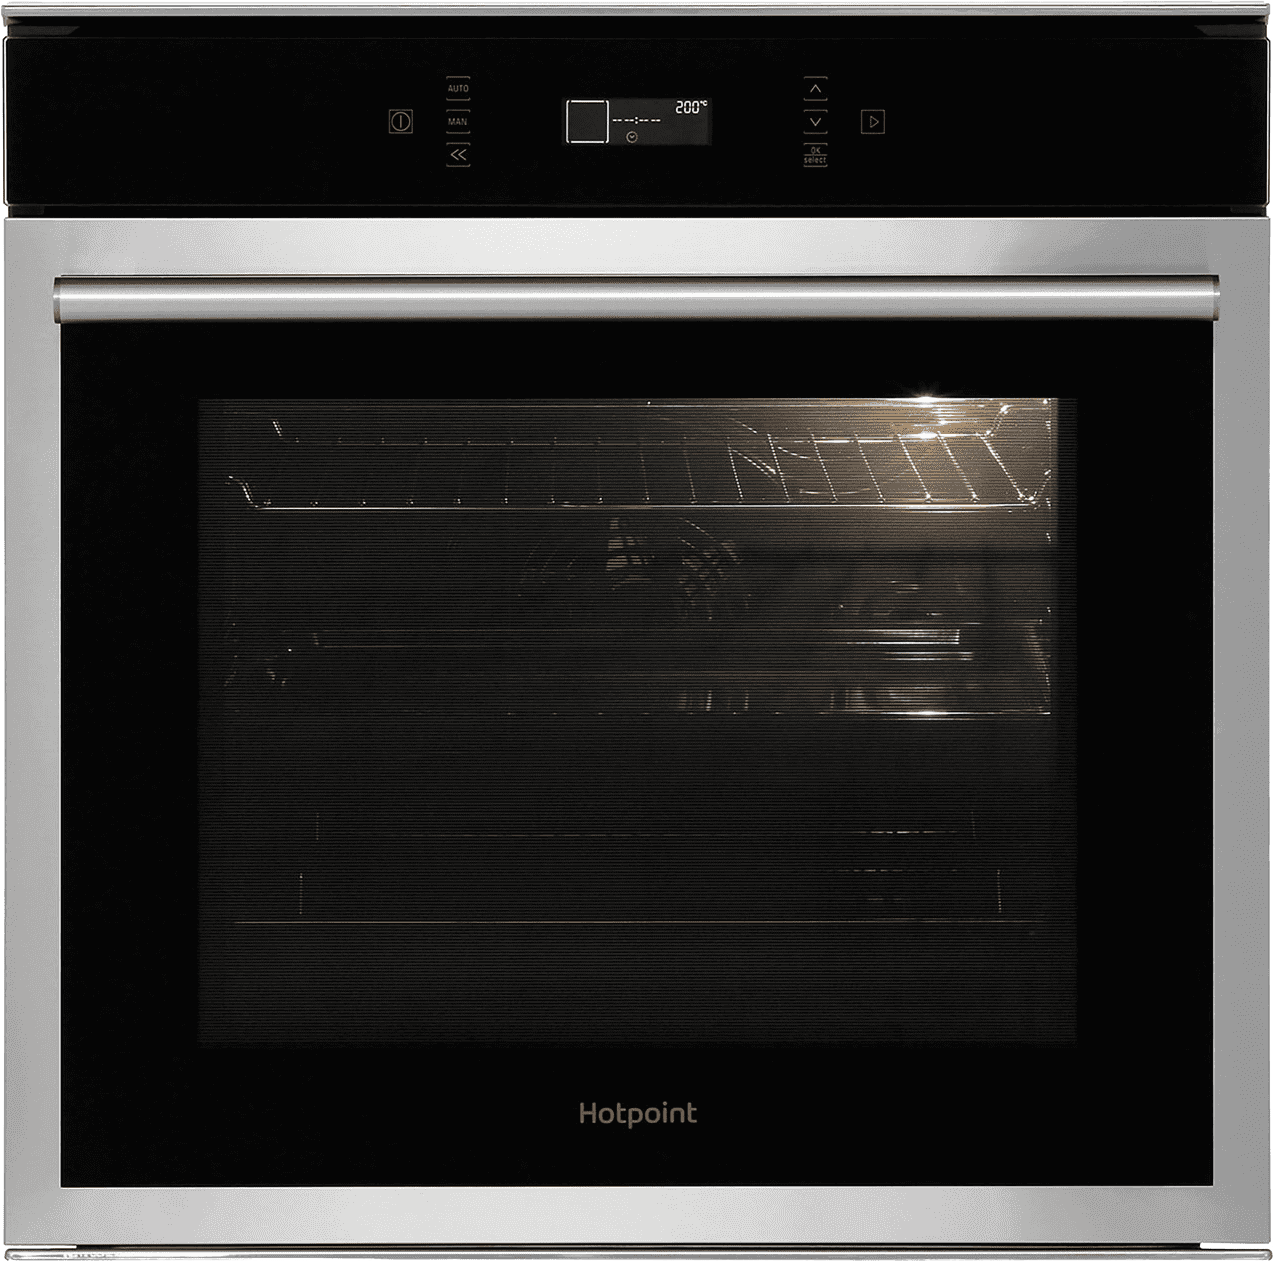 Hotpoint Class 6 SI6874SHIX Built In Electric Single Oven - Stainless Steel - A+ Rated, Stainless Steel